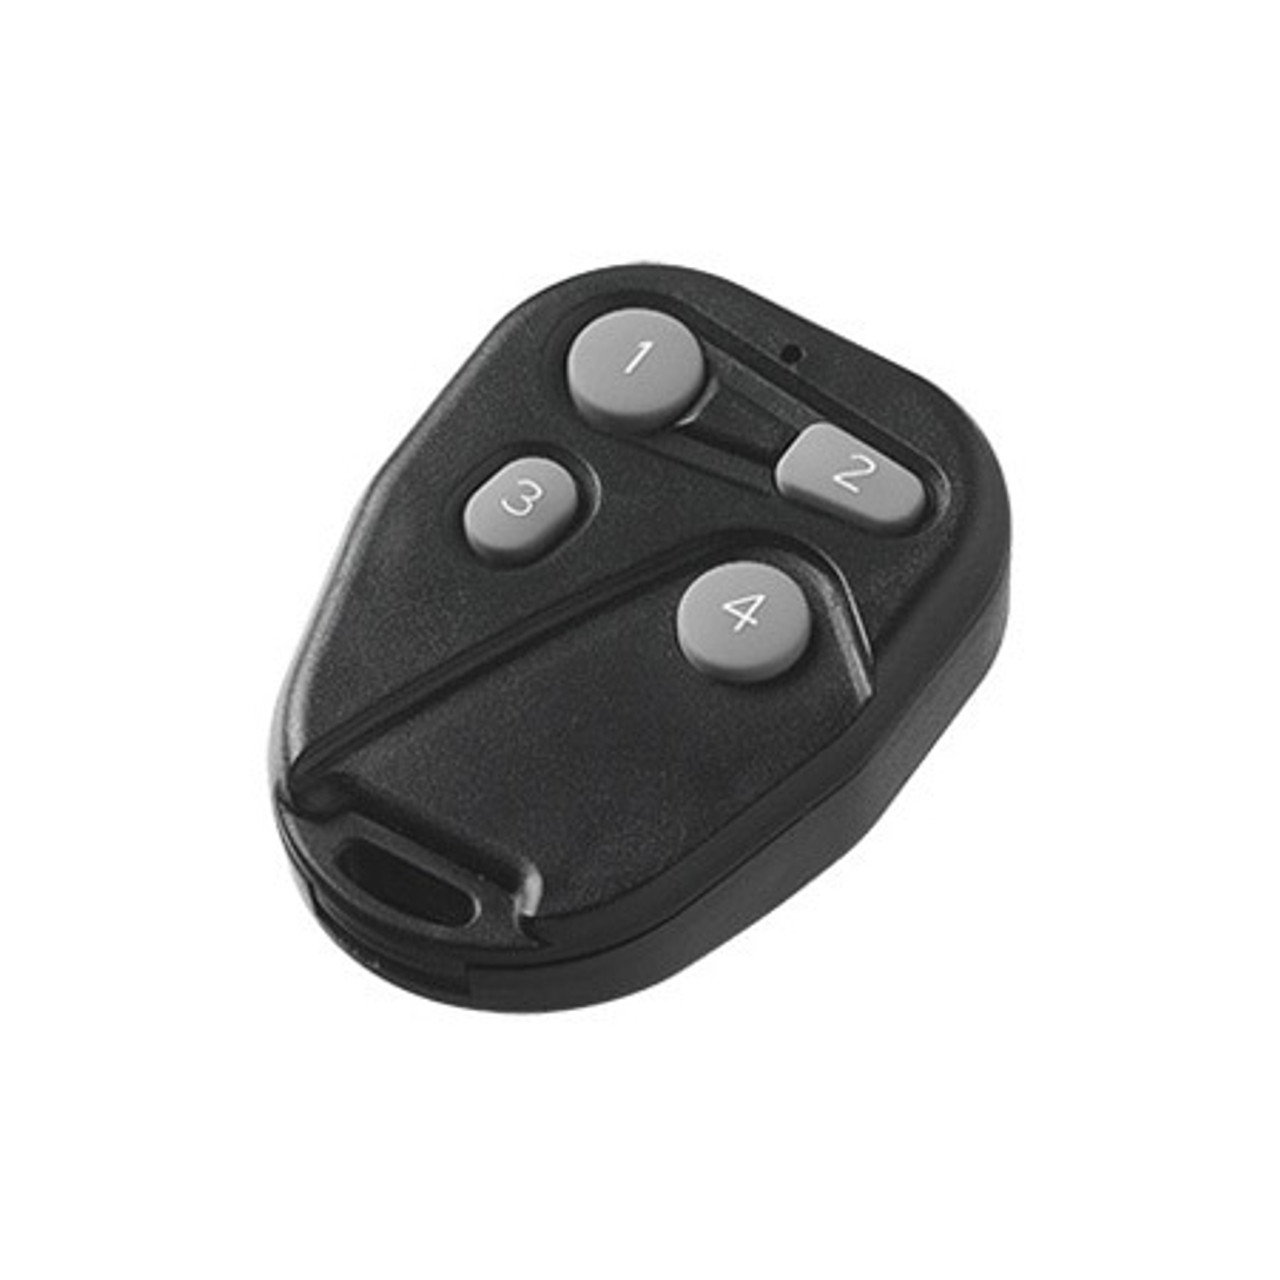 Kantech ioProx Transmitters (Remotes)